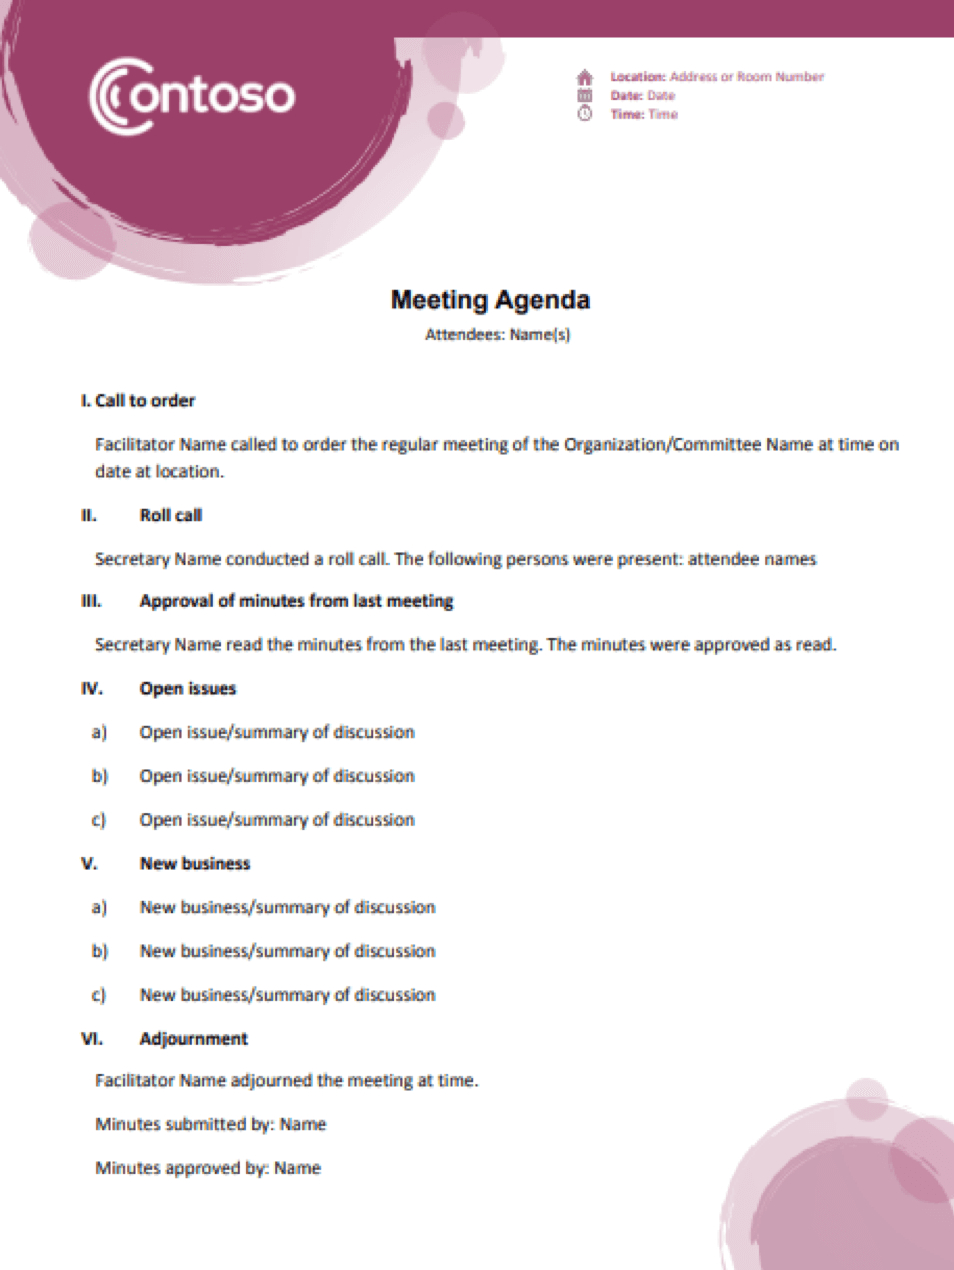 How To Write A Meeting Agenda For Conference Calls Within Conference Call Agenda Template